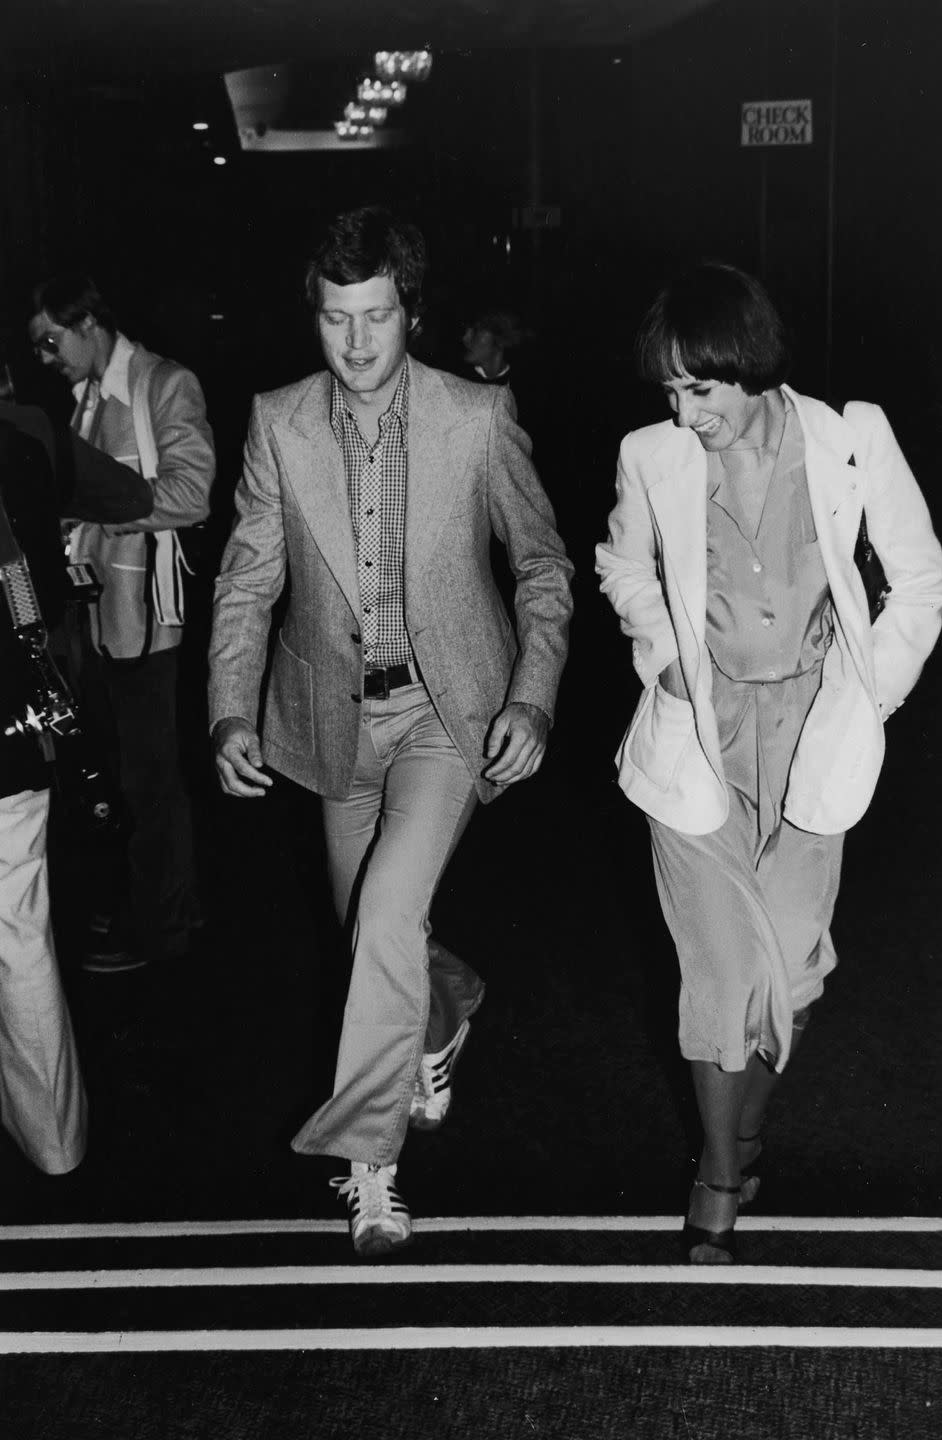 These Photos Prove Celebrities Partied Harder in the '70s